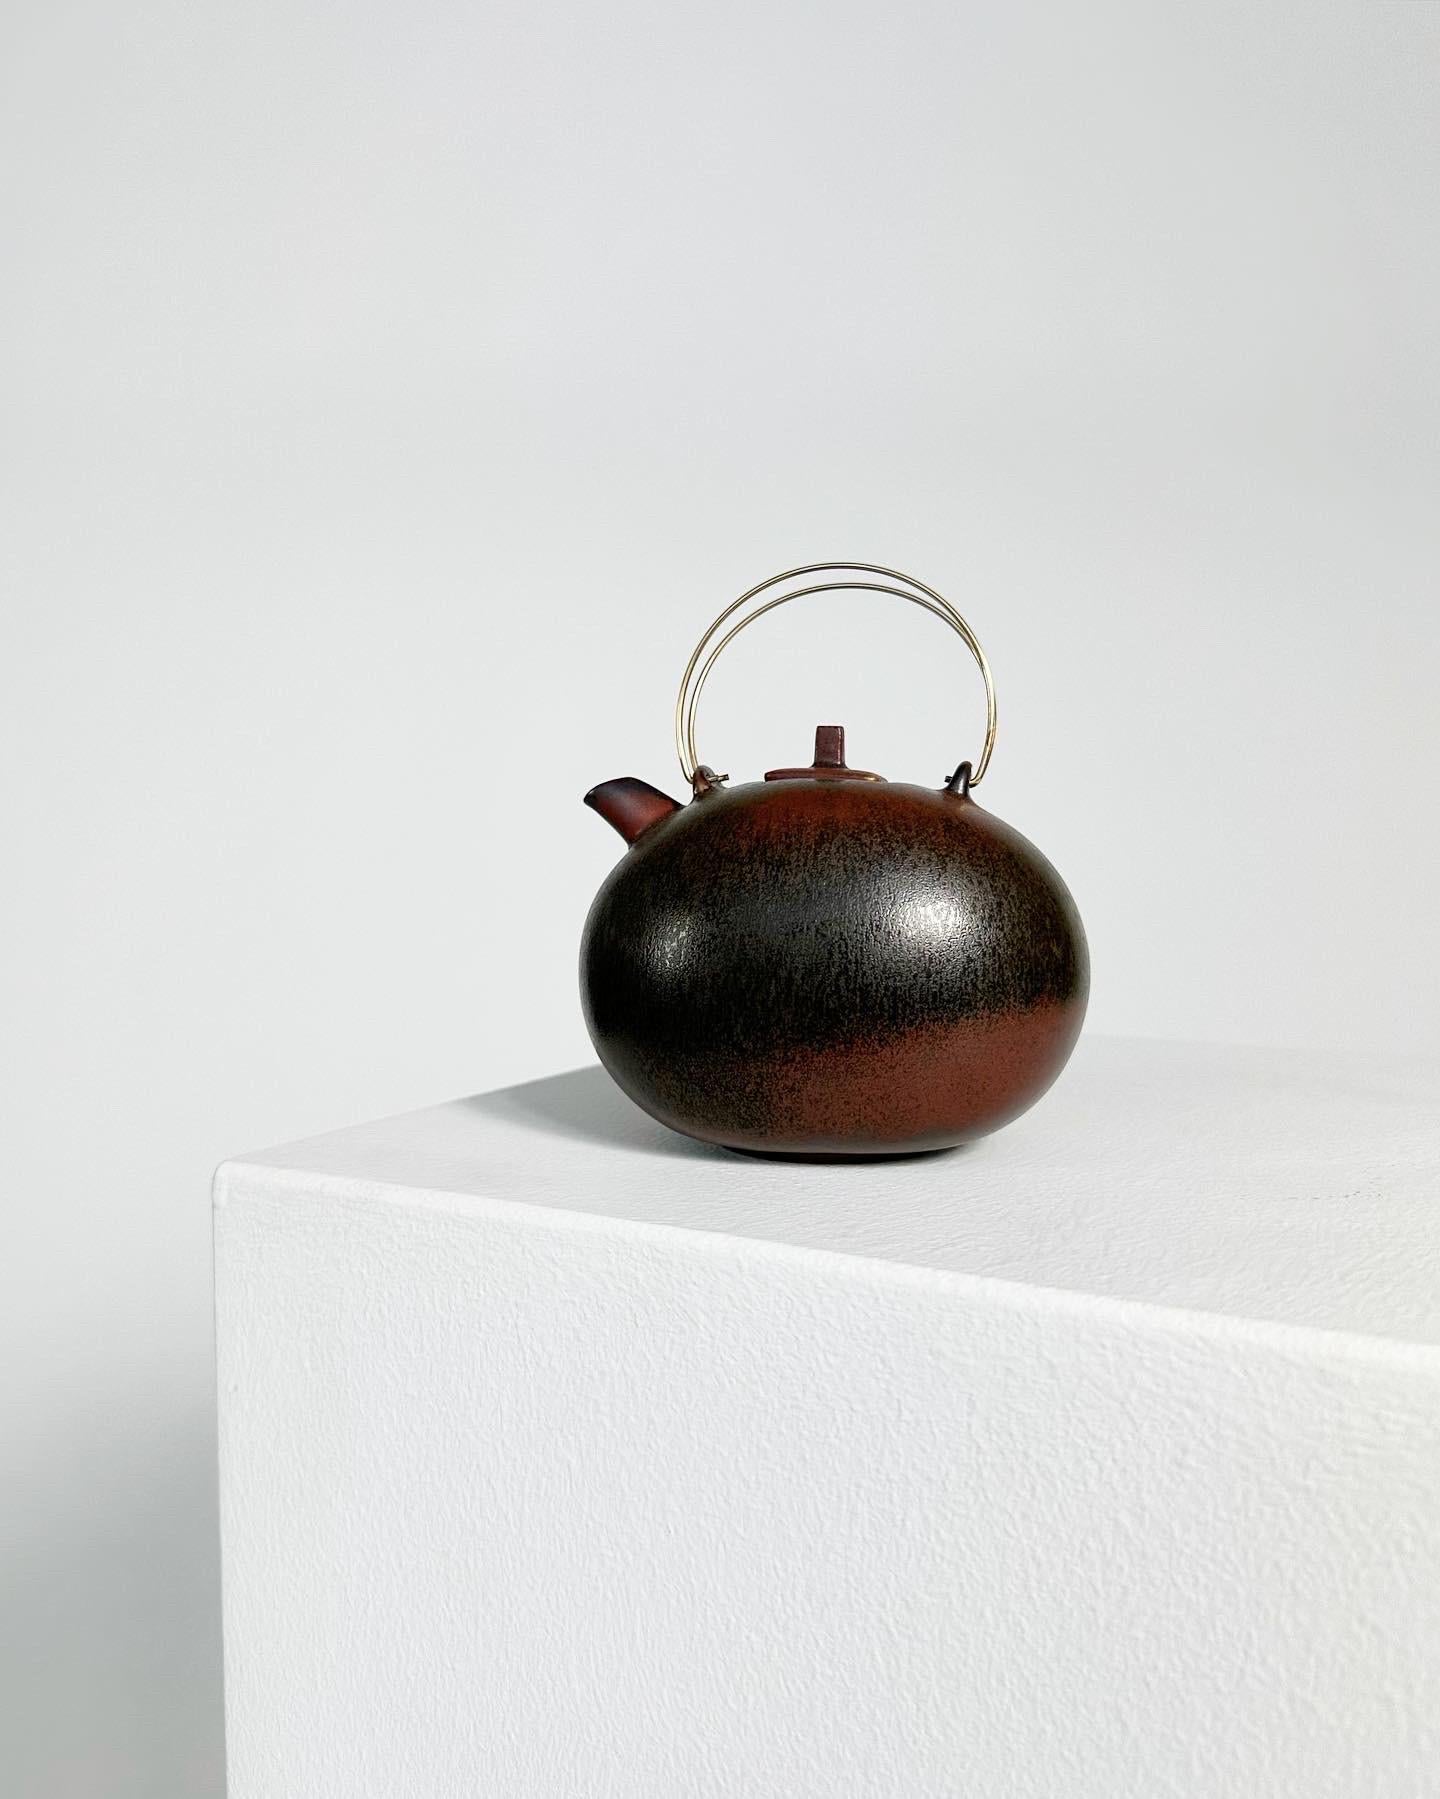 Rare small teapot by Gösta Grähs for Rörstrand factory in Sweden, 1980s. 

Hand-made stoneware with a beautiful mossy brown and rusty red glaze, finished with delicate brass handles. 

Excellent condition, marked and signed underneath.

Height: 14